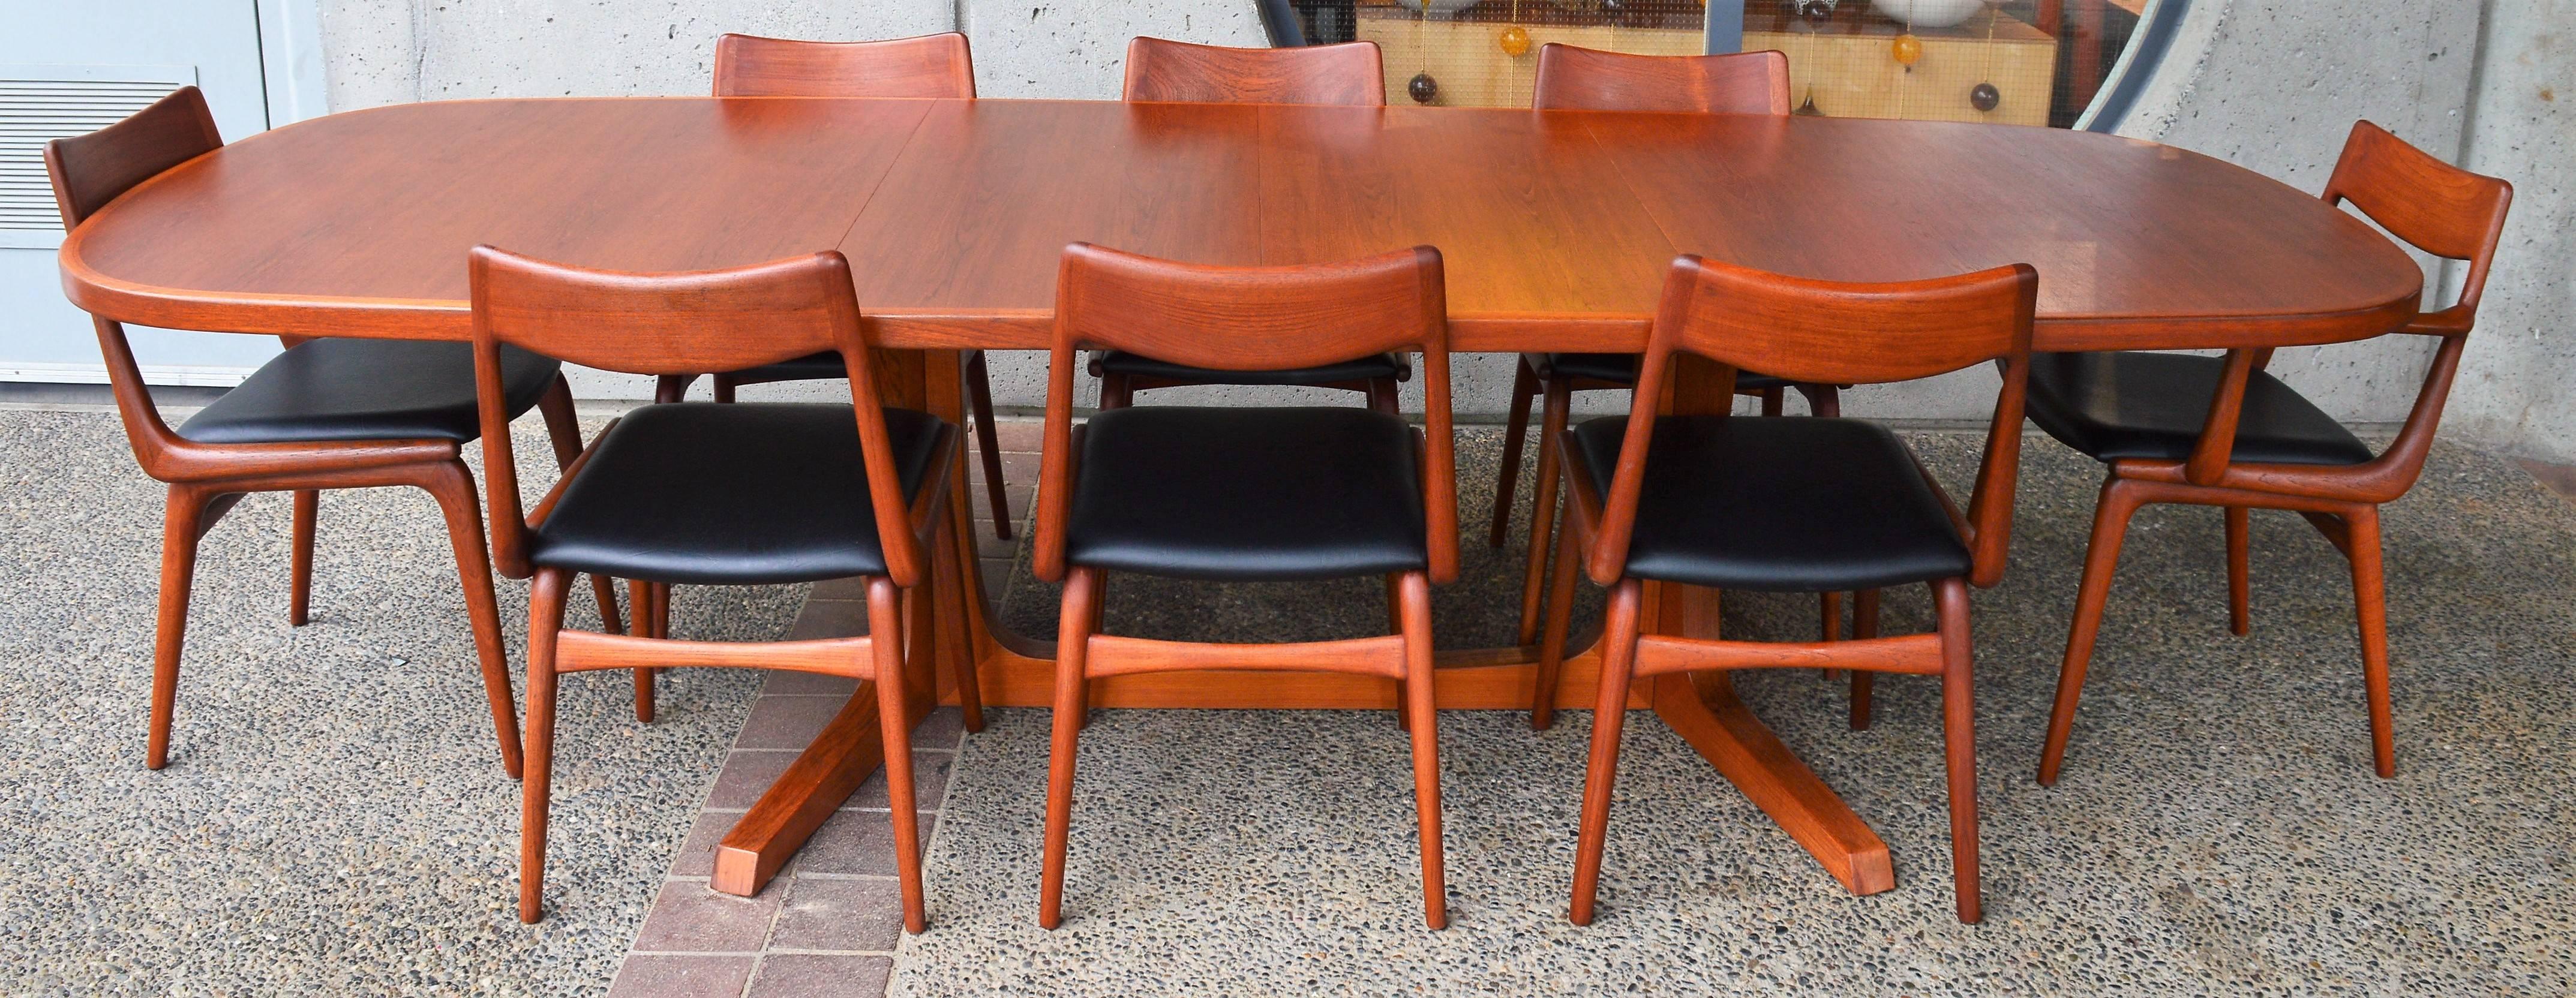 Mid-Century Modern Danish Modern Large Teak 1960s Oval Two-Leaf Dining Table by NO Moller for Gudme